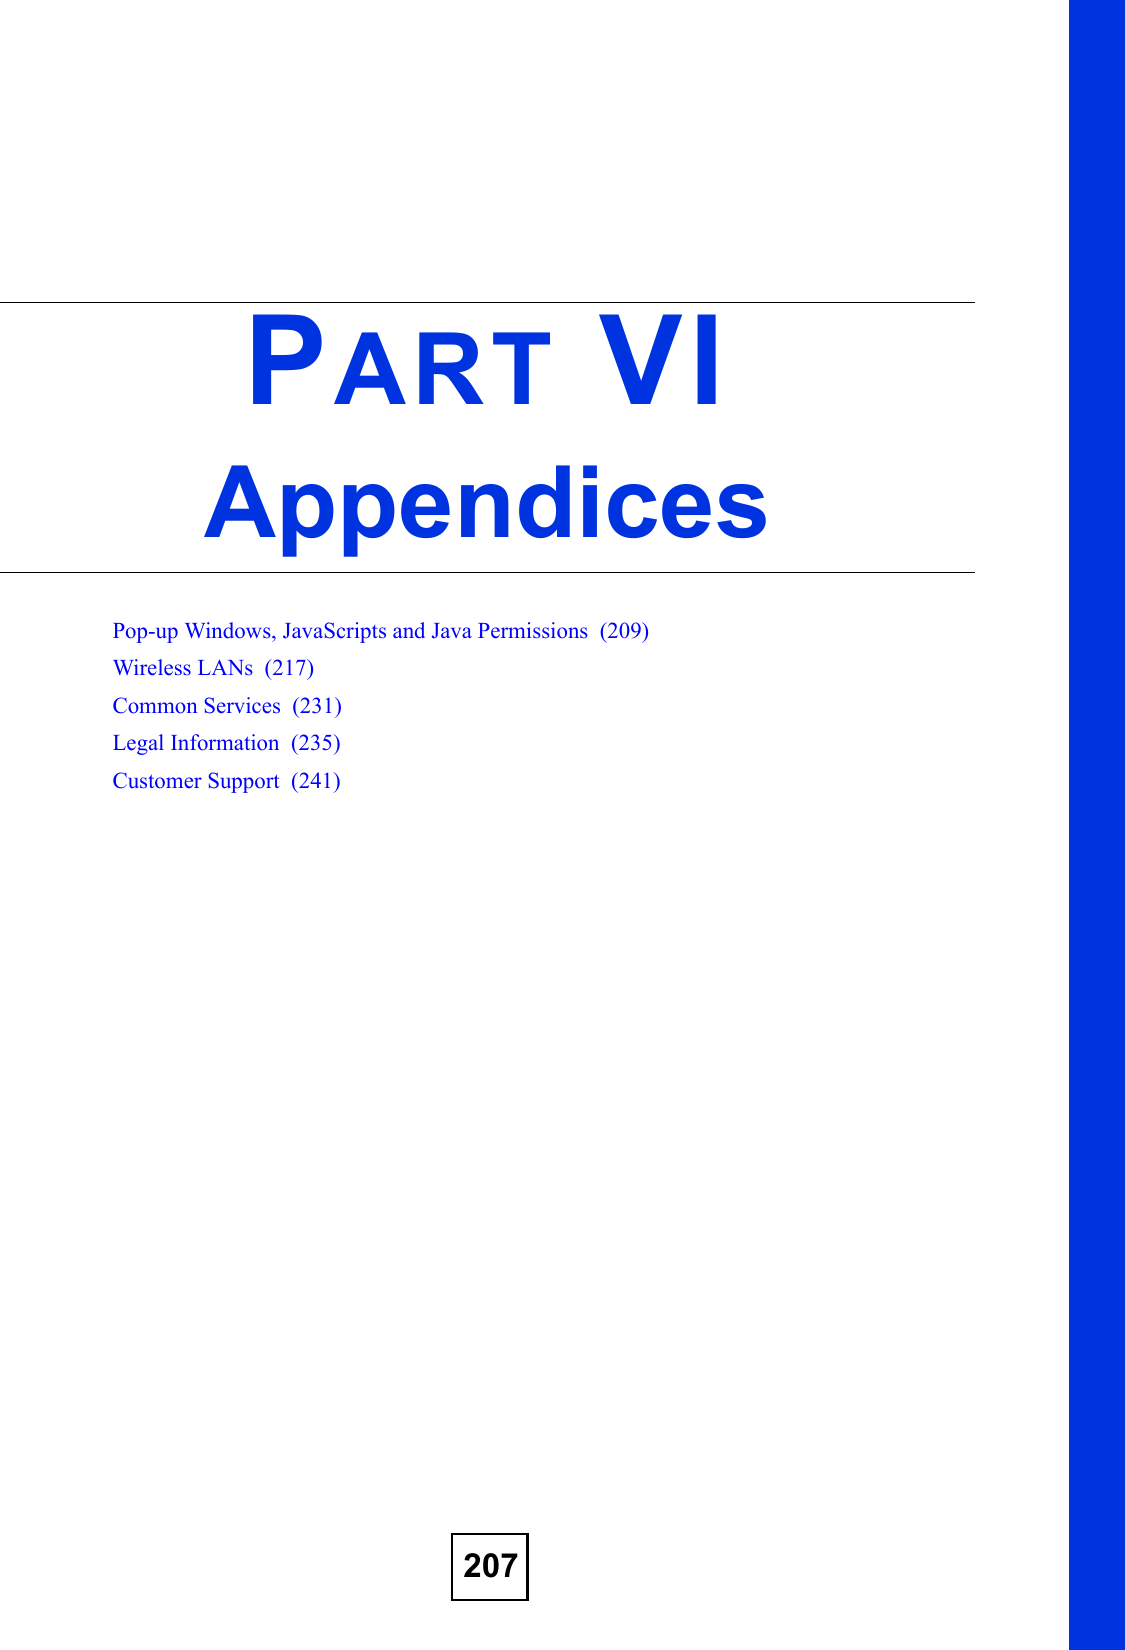 207PART VIAppendicesPop-up Windows, JavaScripts and Java Permissions  (209)Wireless LANs  (217)Common Services  (231)Legal Information  (235)Customer Support  (241)